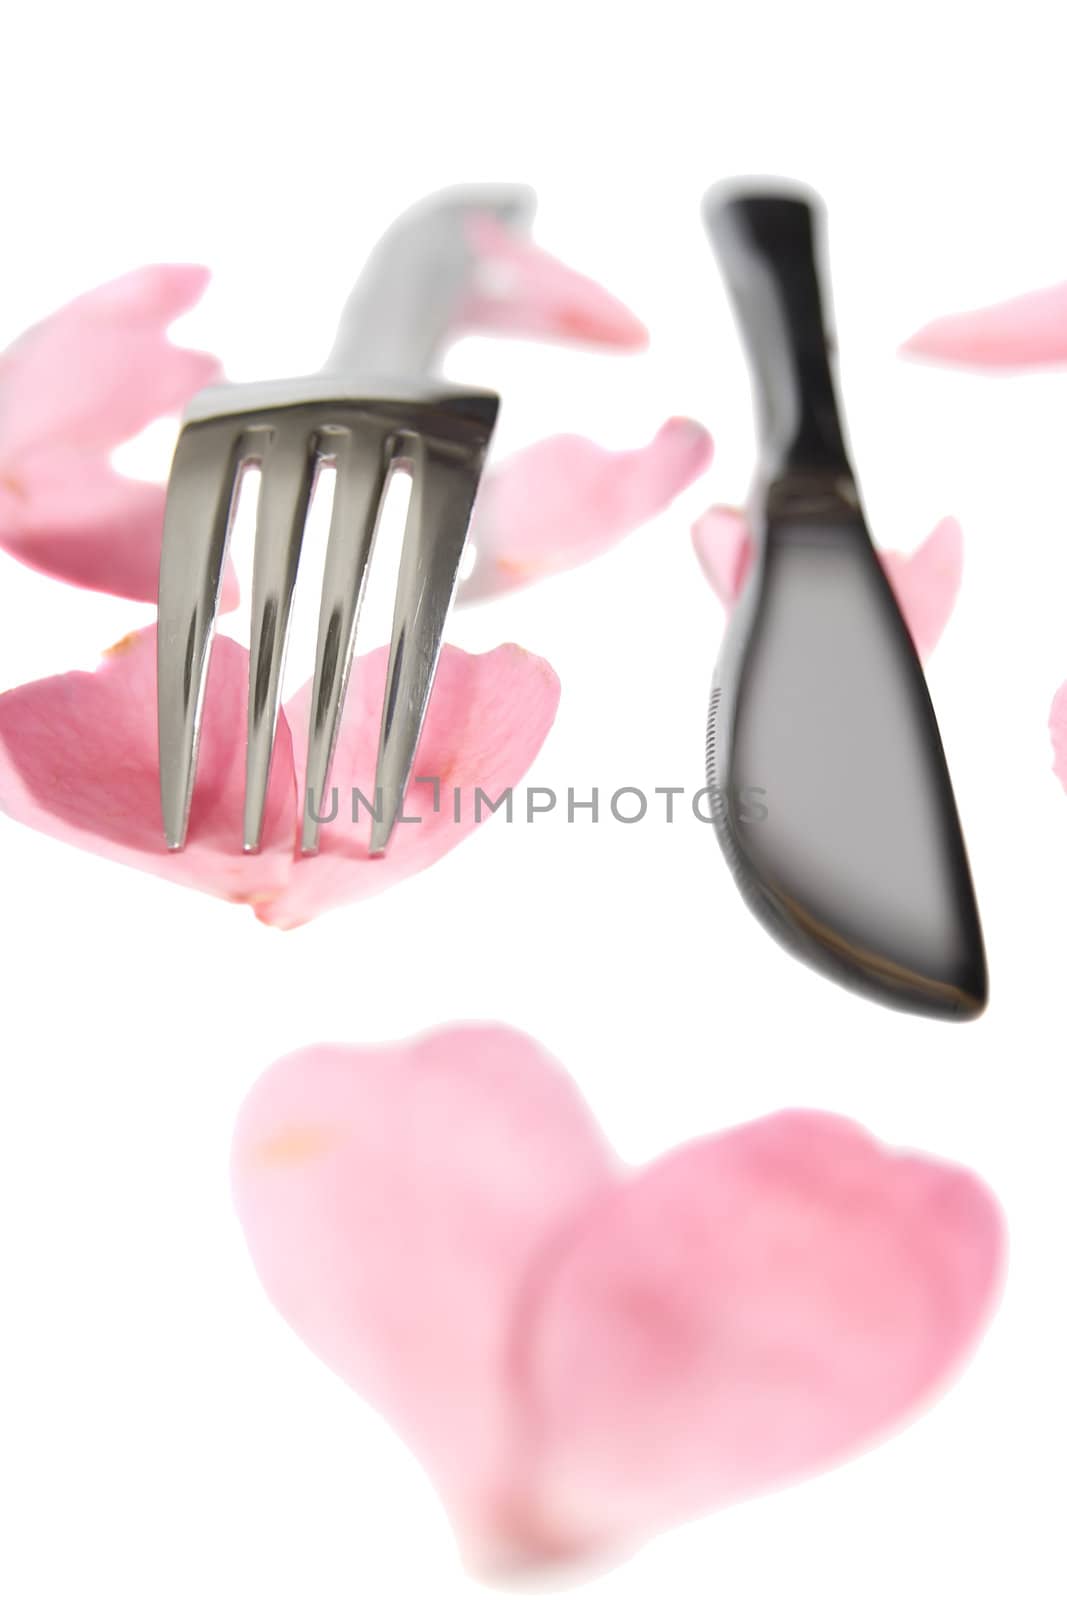 silver knife and fork isolated with rose petals by morrbyte